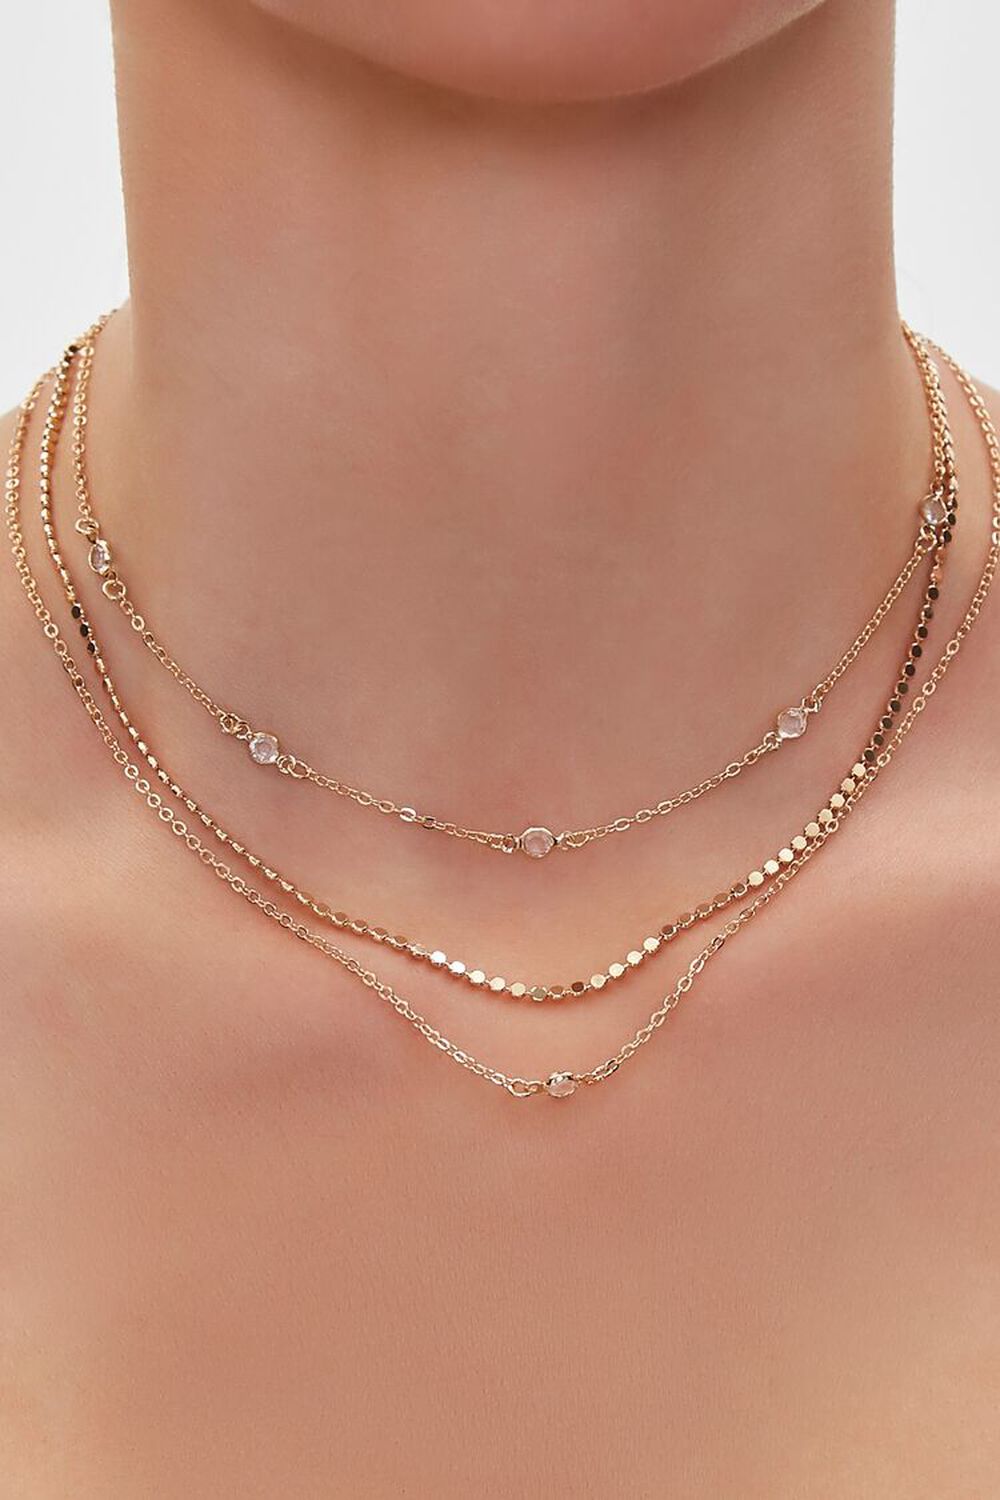 Faux Gem Layered Chain Necklace, image 1